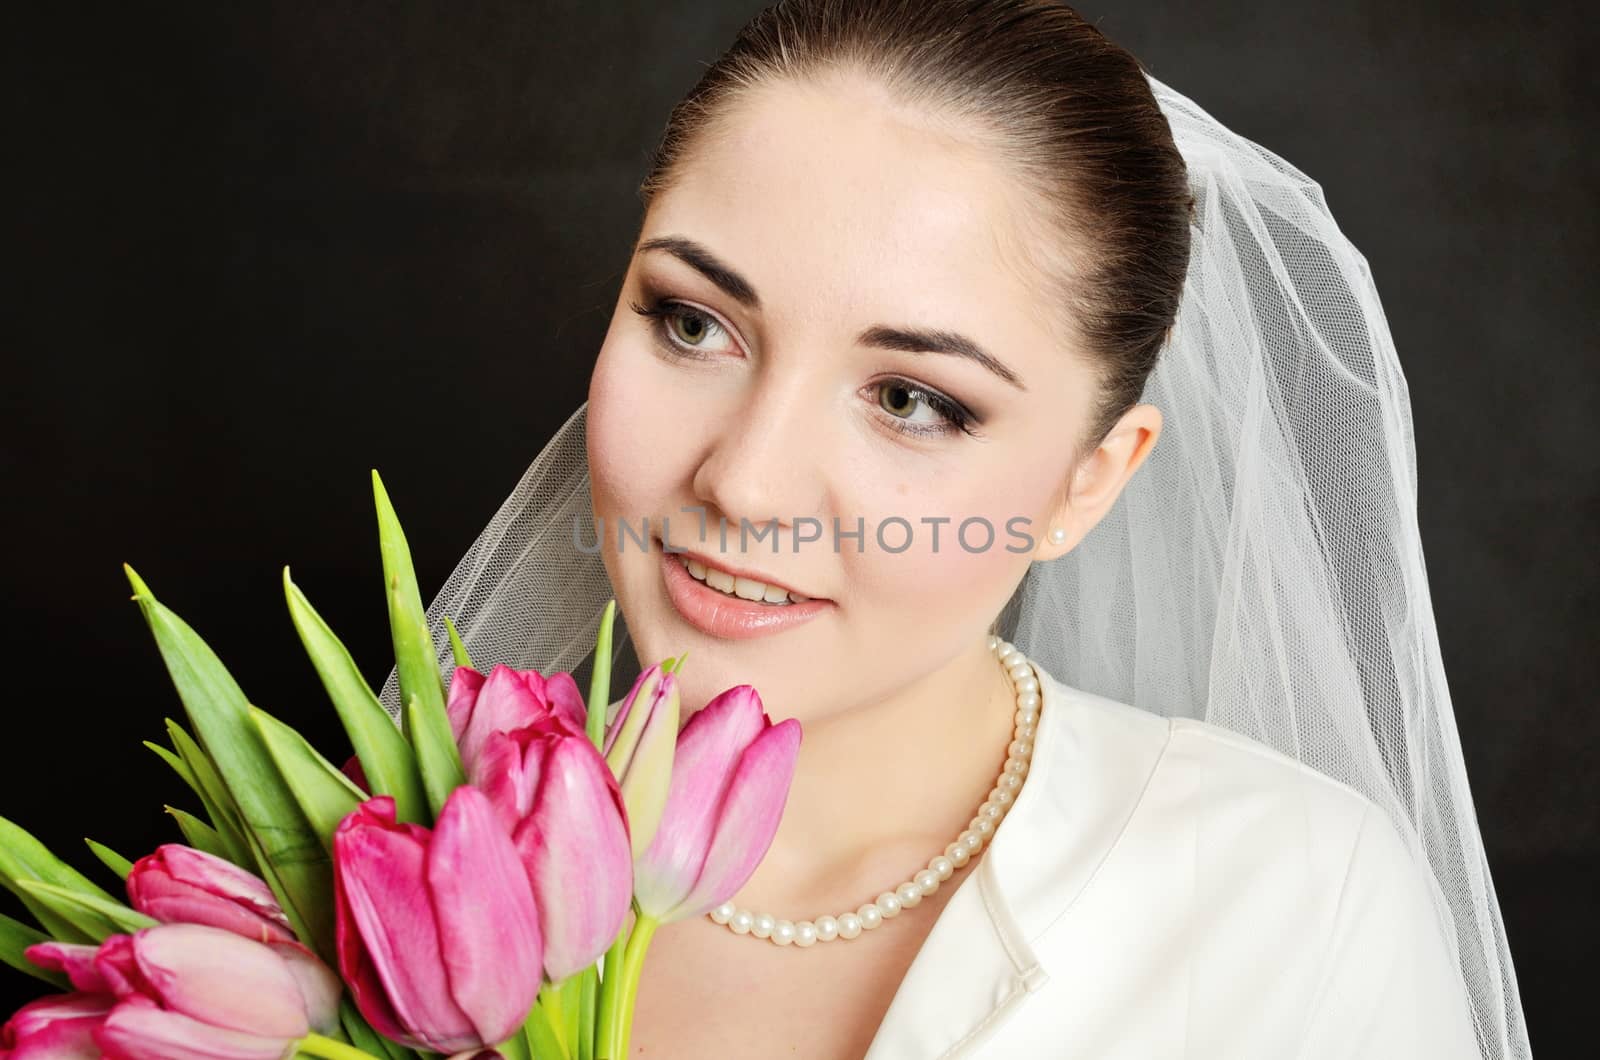 Bride with white veil and flowers by bartekchiny